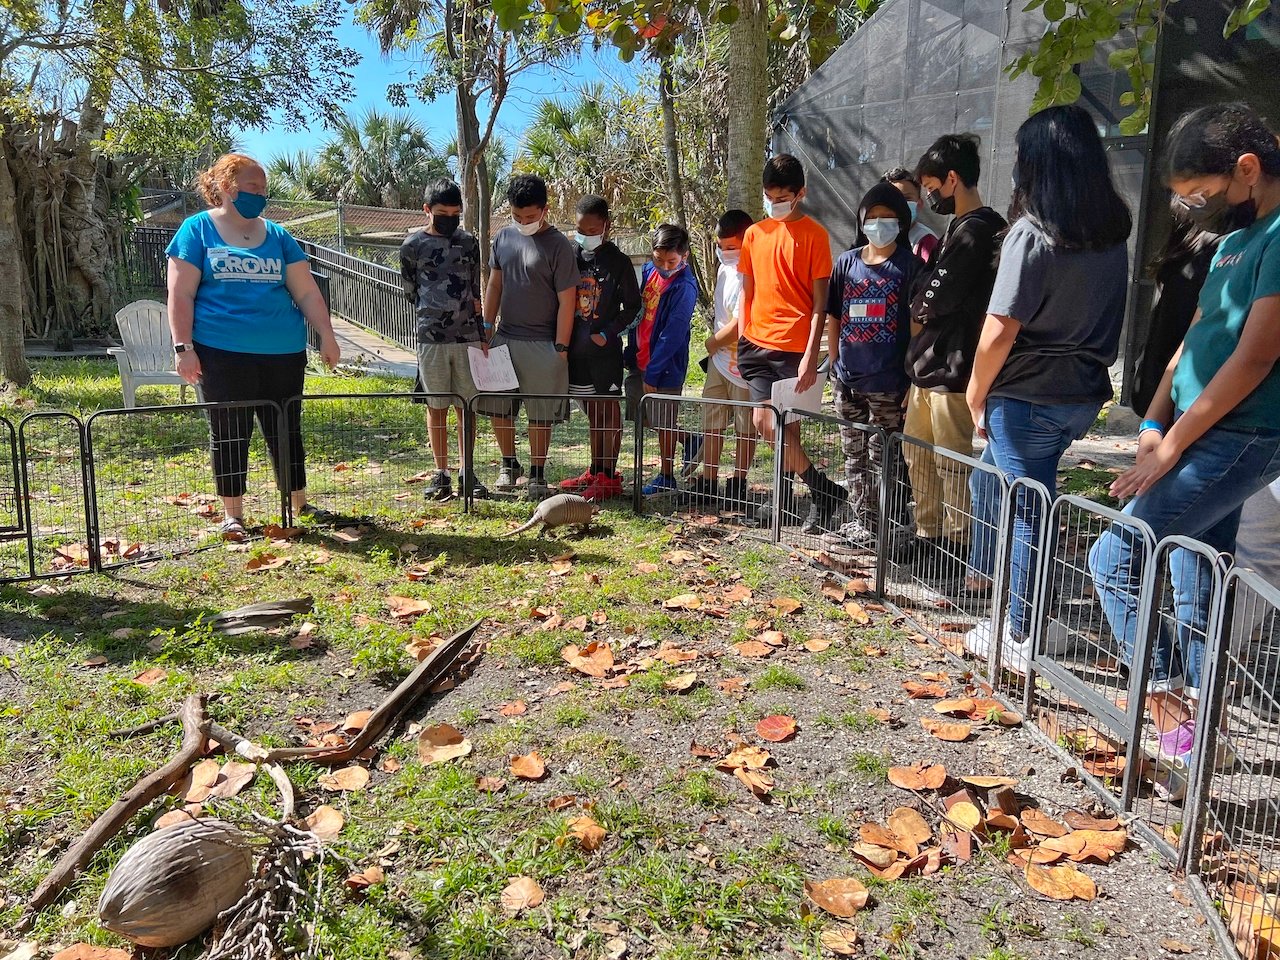 Sixth-grade students from The Immokalee Foundation’s Middle School Program learning about animals at the Clinic for the Rehabilitation of Wildlife (CROW) in Sanibel.